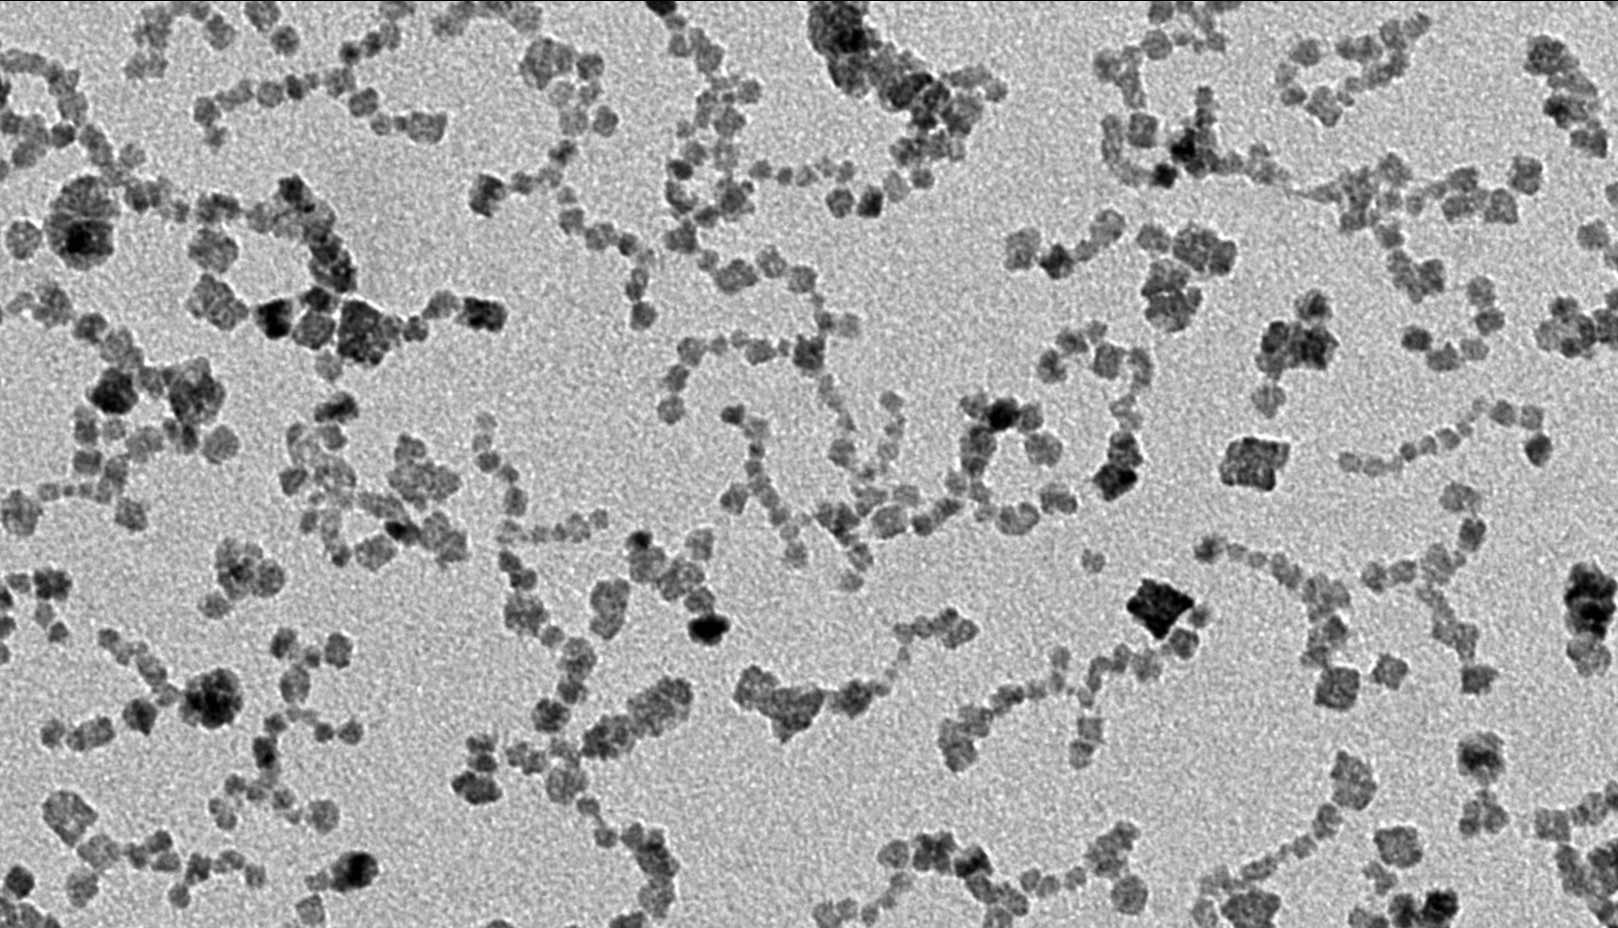 CeO2 nanoparticles observed by TEM